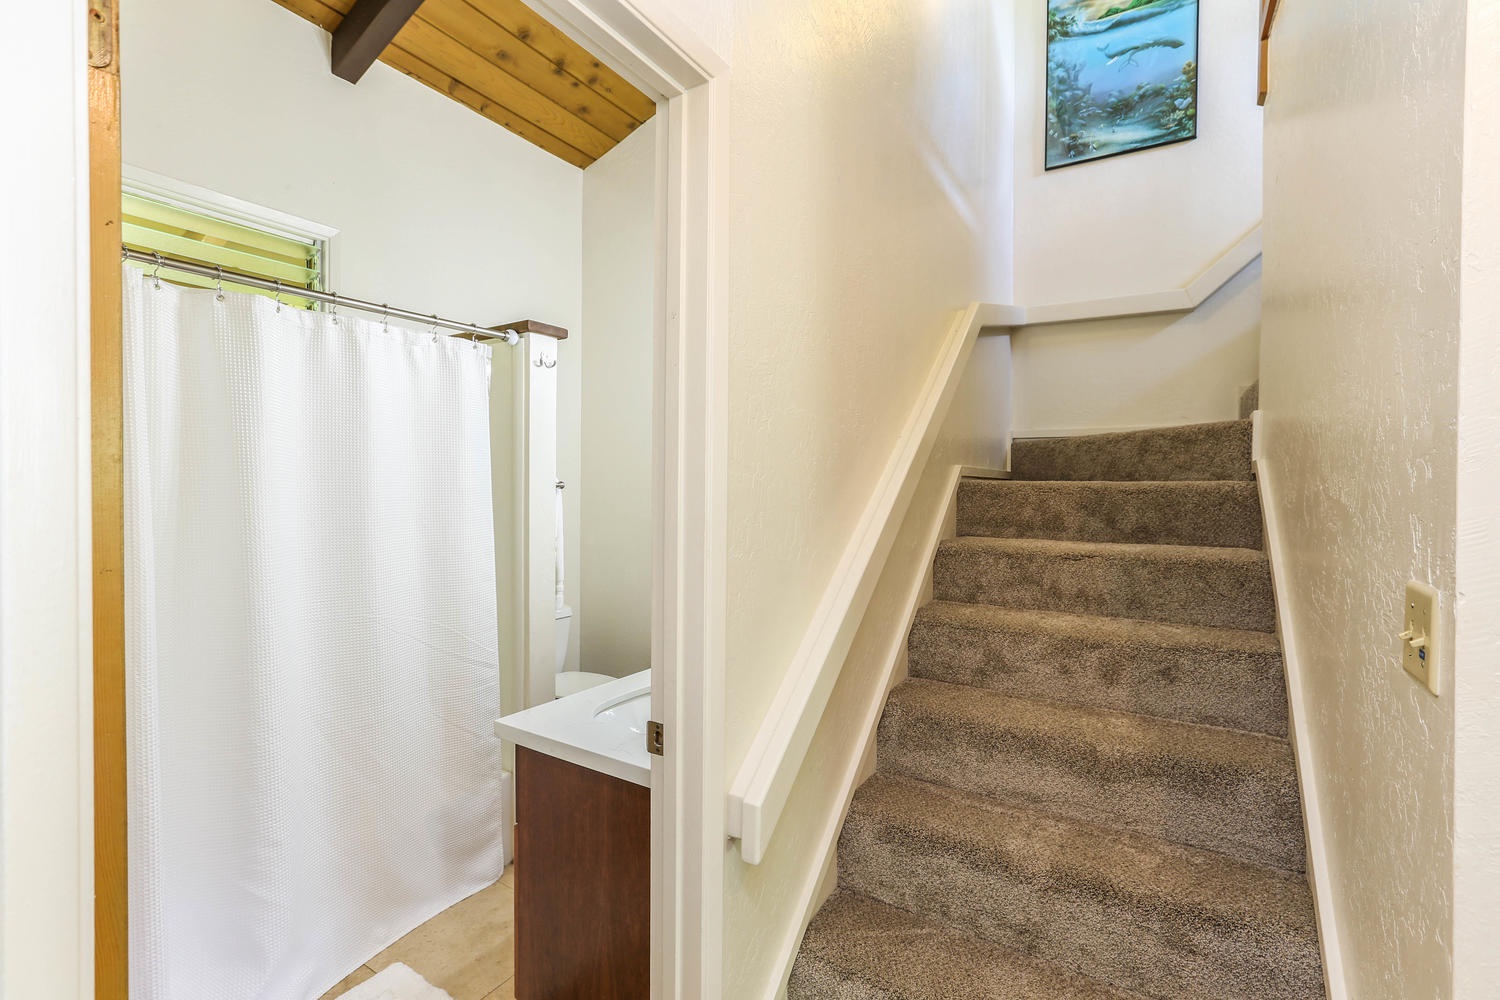 Hanalei Vacation Rentals, Hallor House TVNC #5147 - Stairs to loft